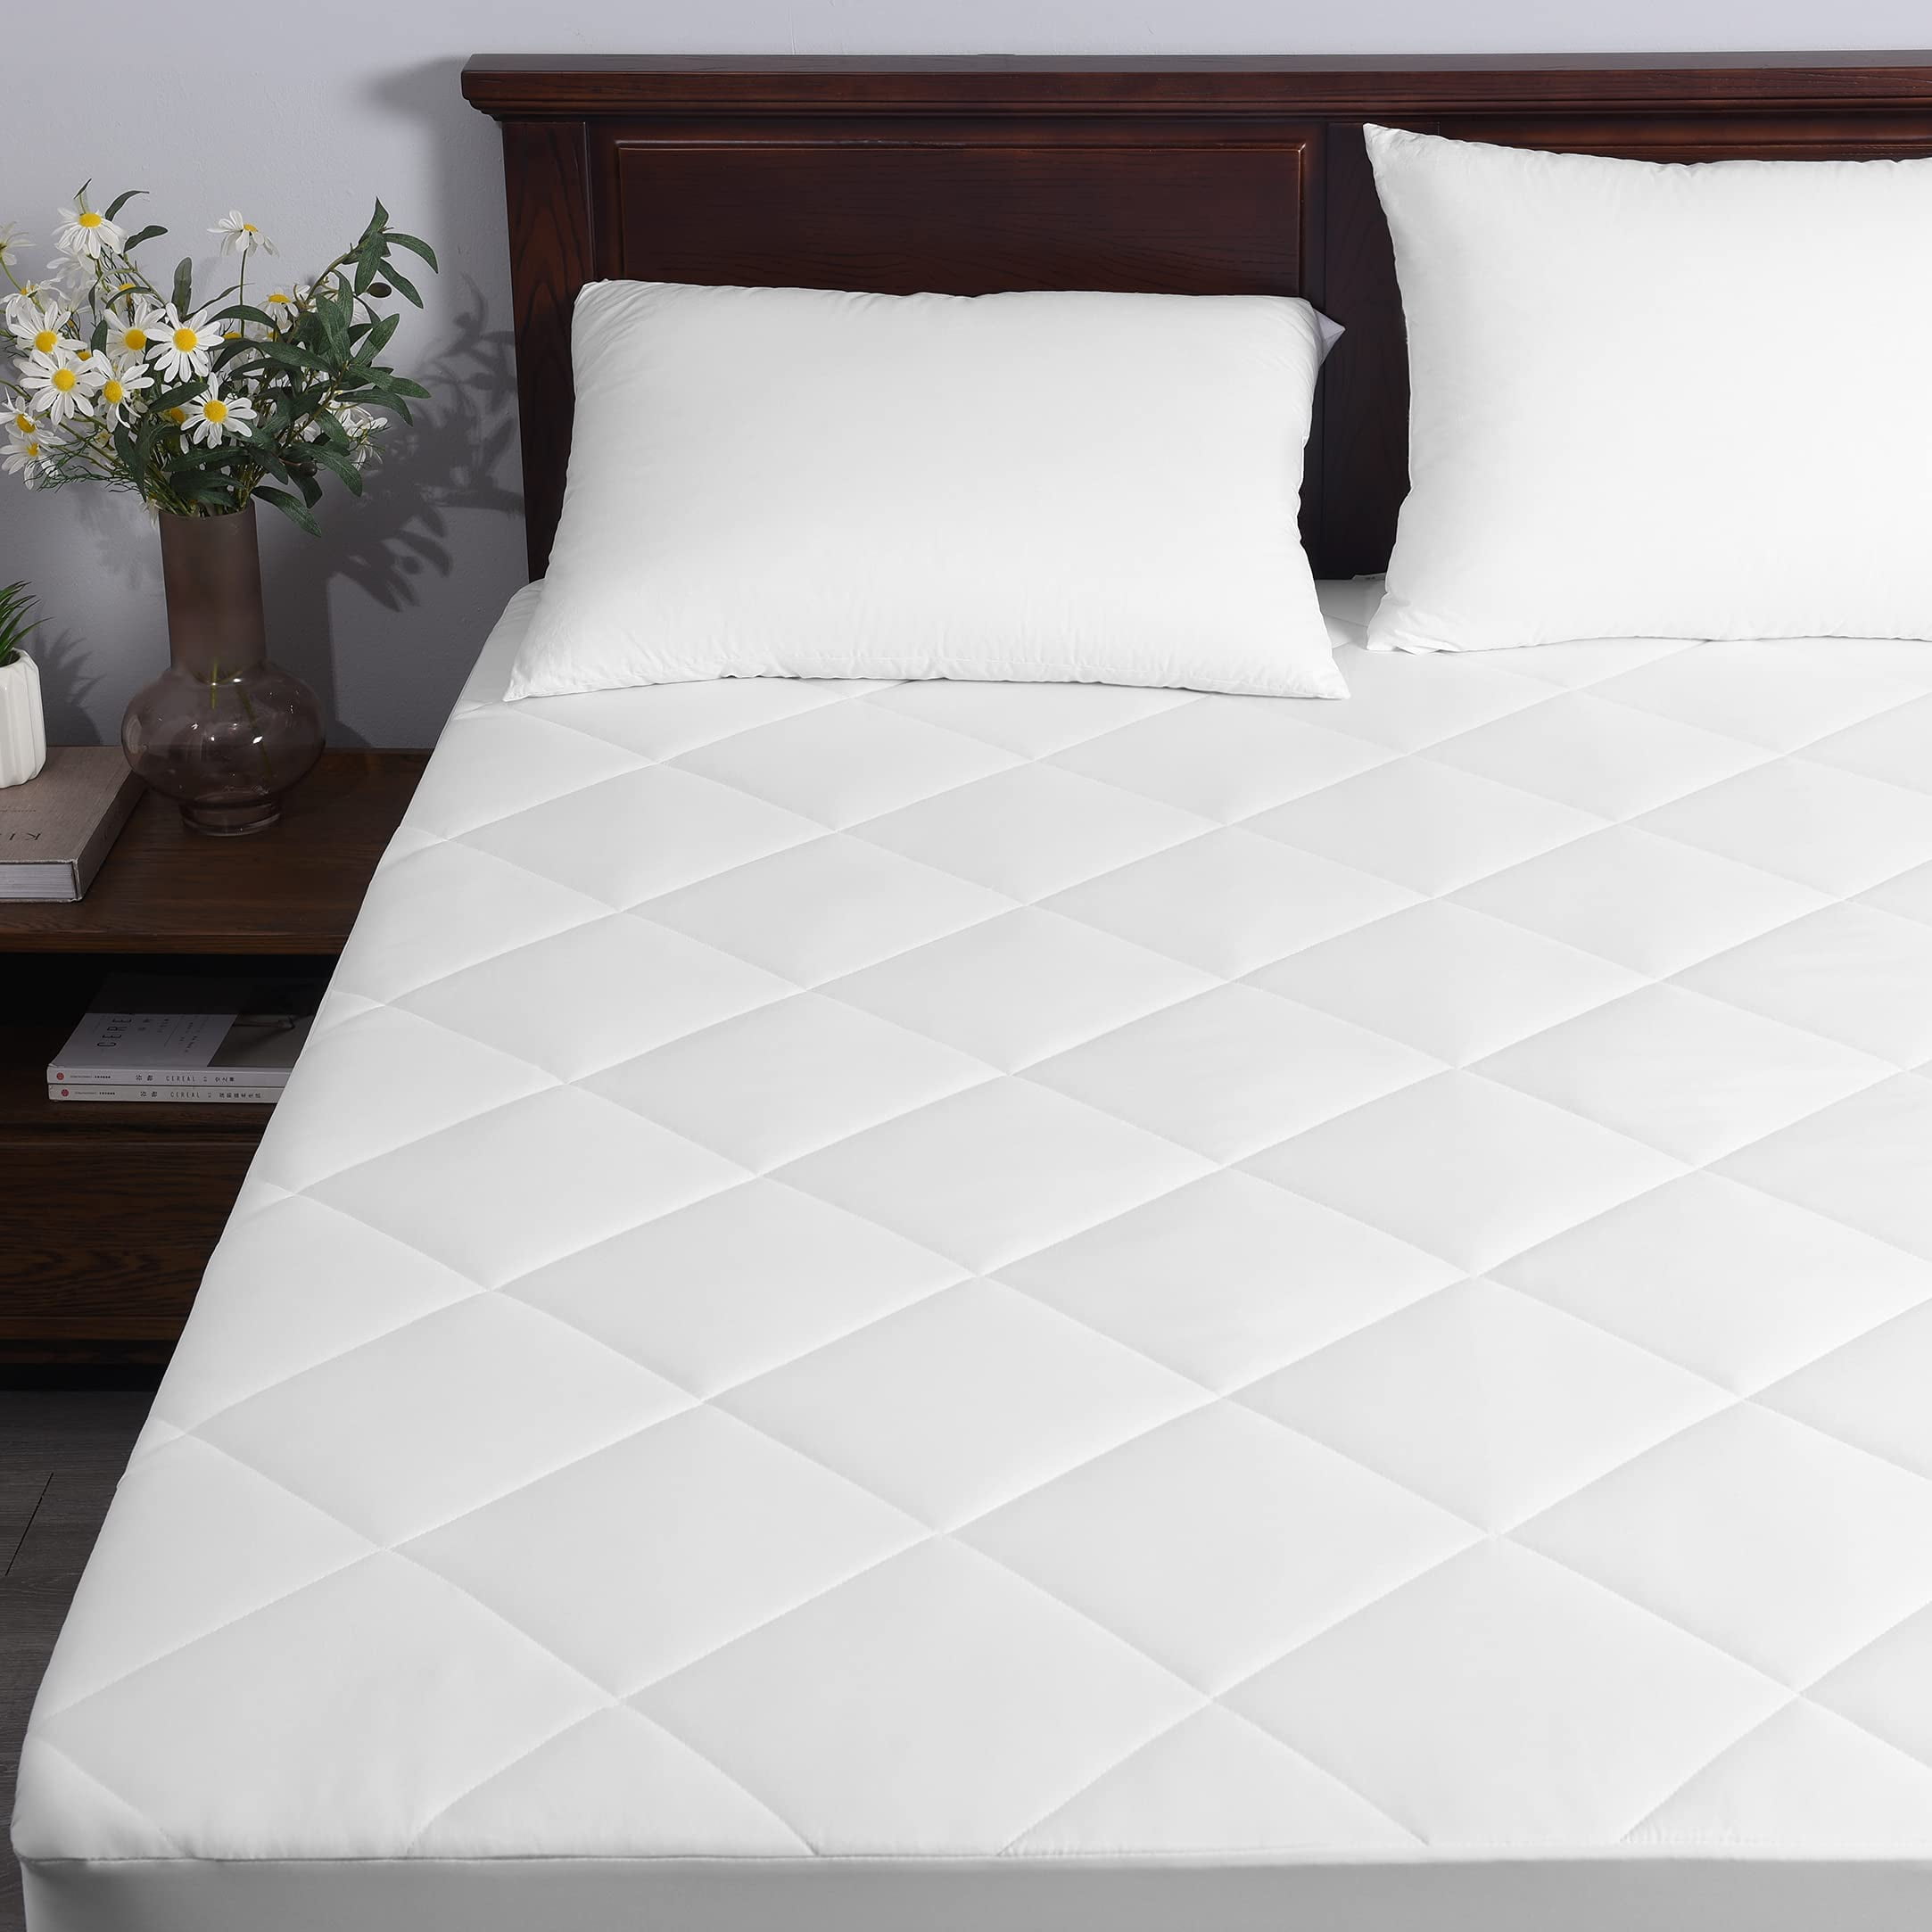 Details about   Hypoallergenic Matress Pad Quilted Plush Down Alternative Fitted Deep Pocket New 